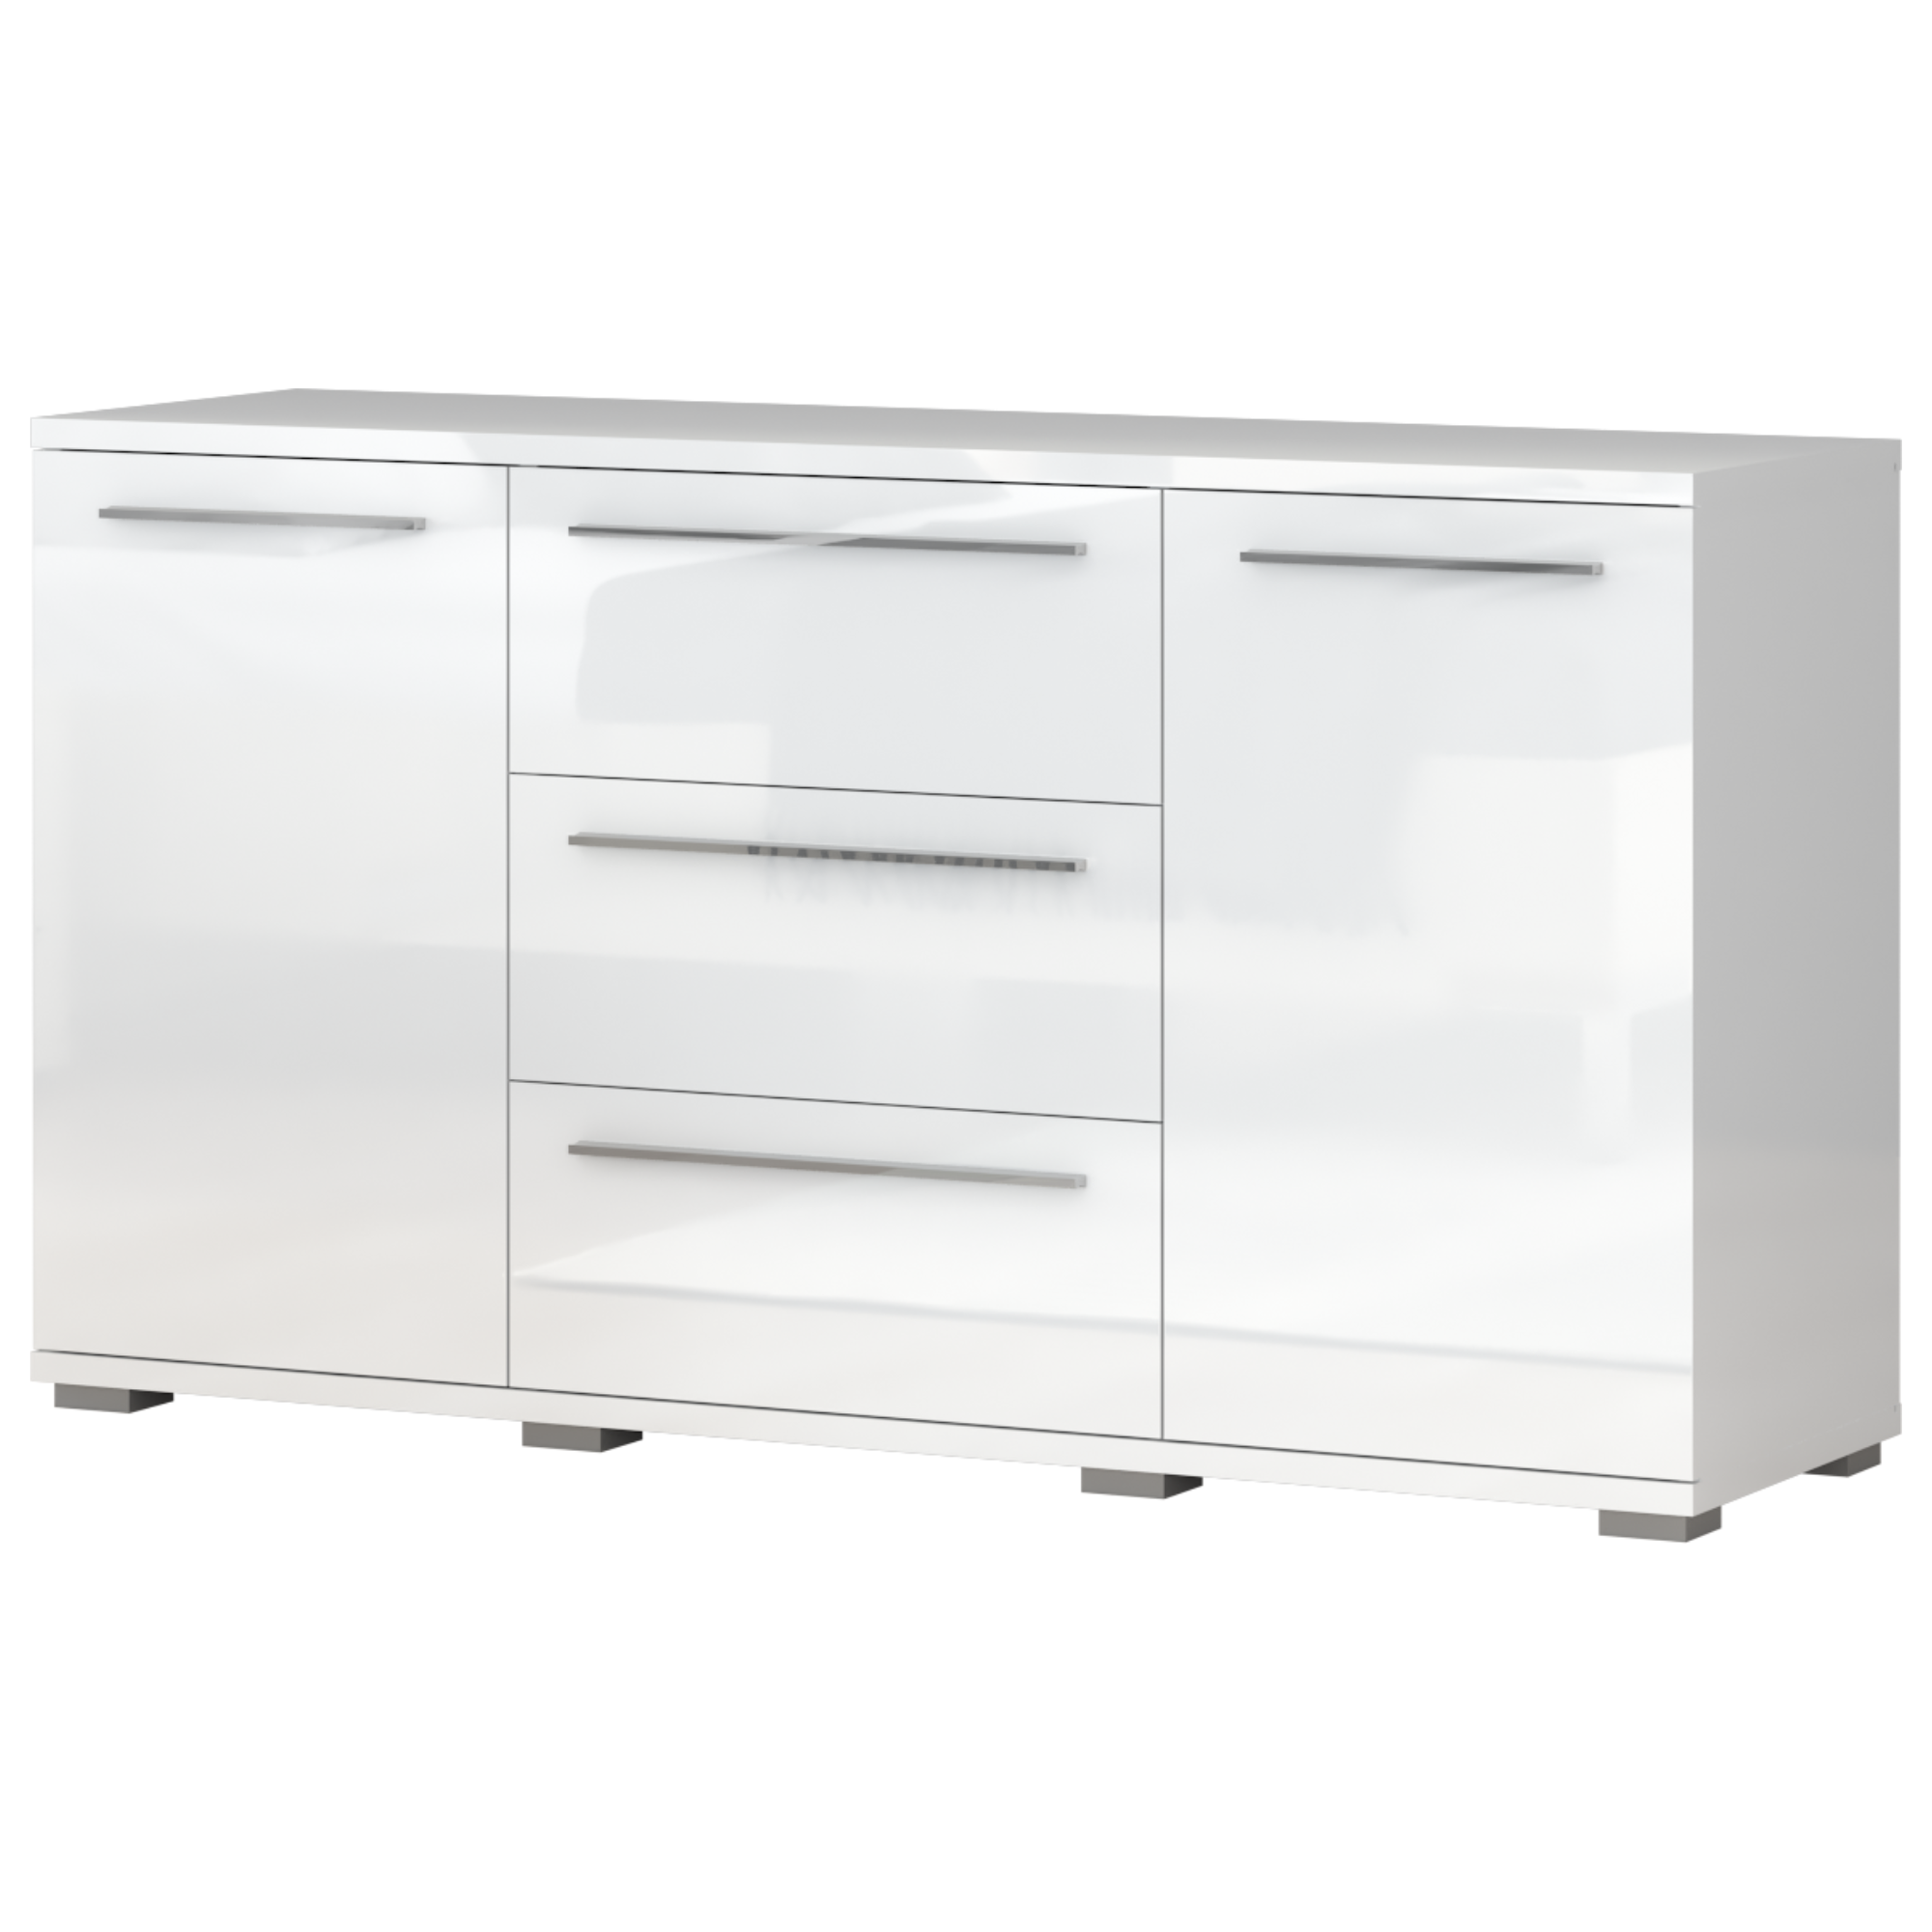 Modern and Functional Dresser from Piano Collection - Furniture.Agency